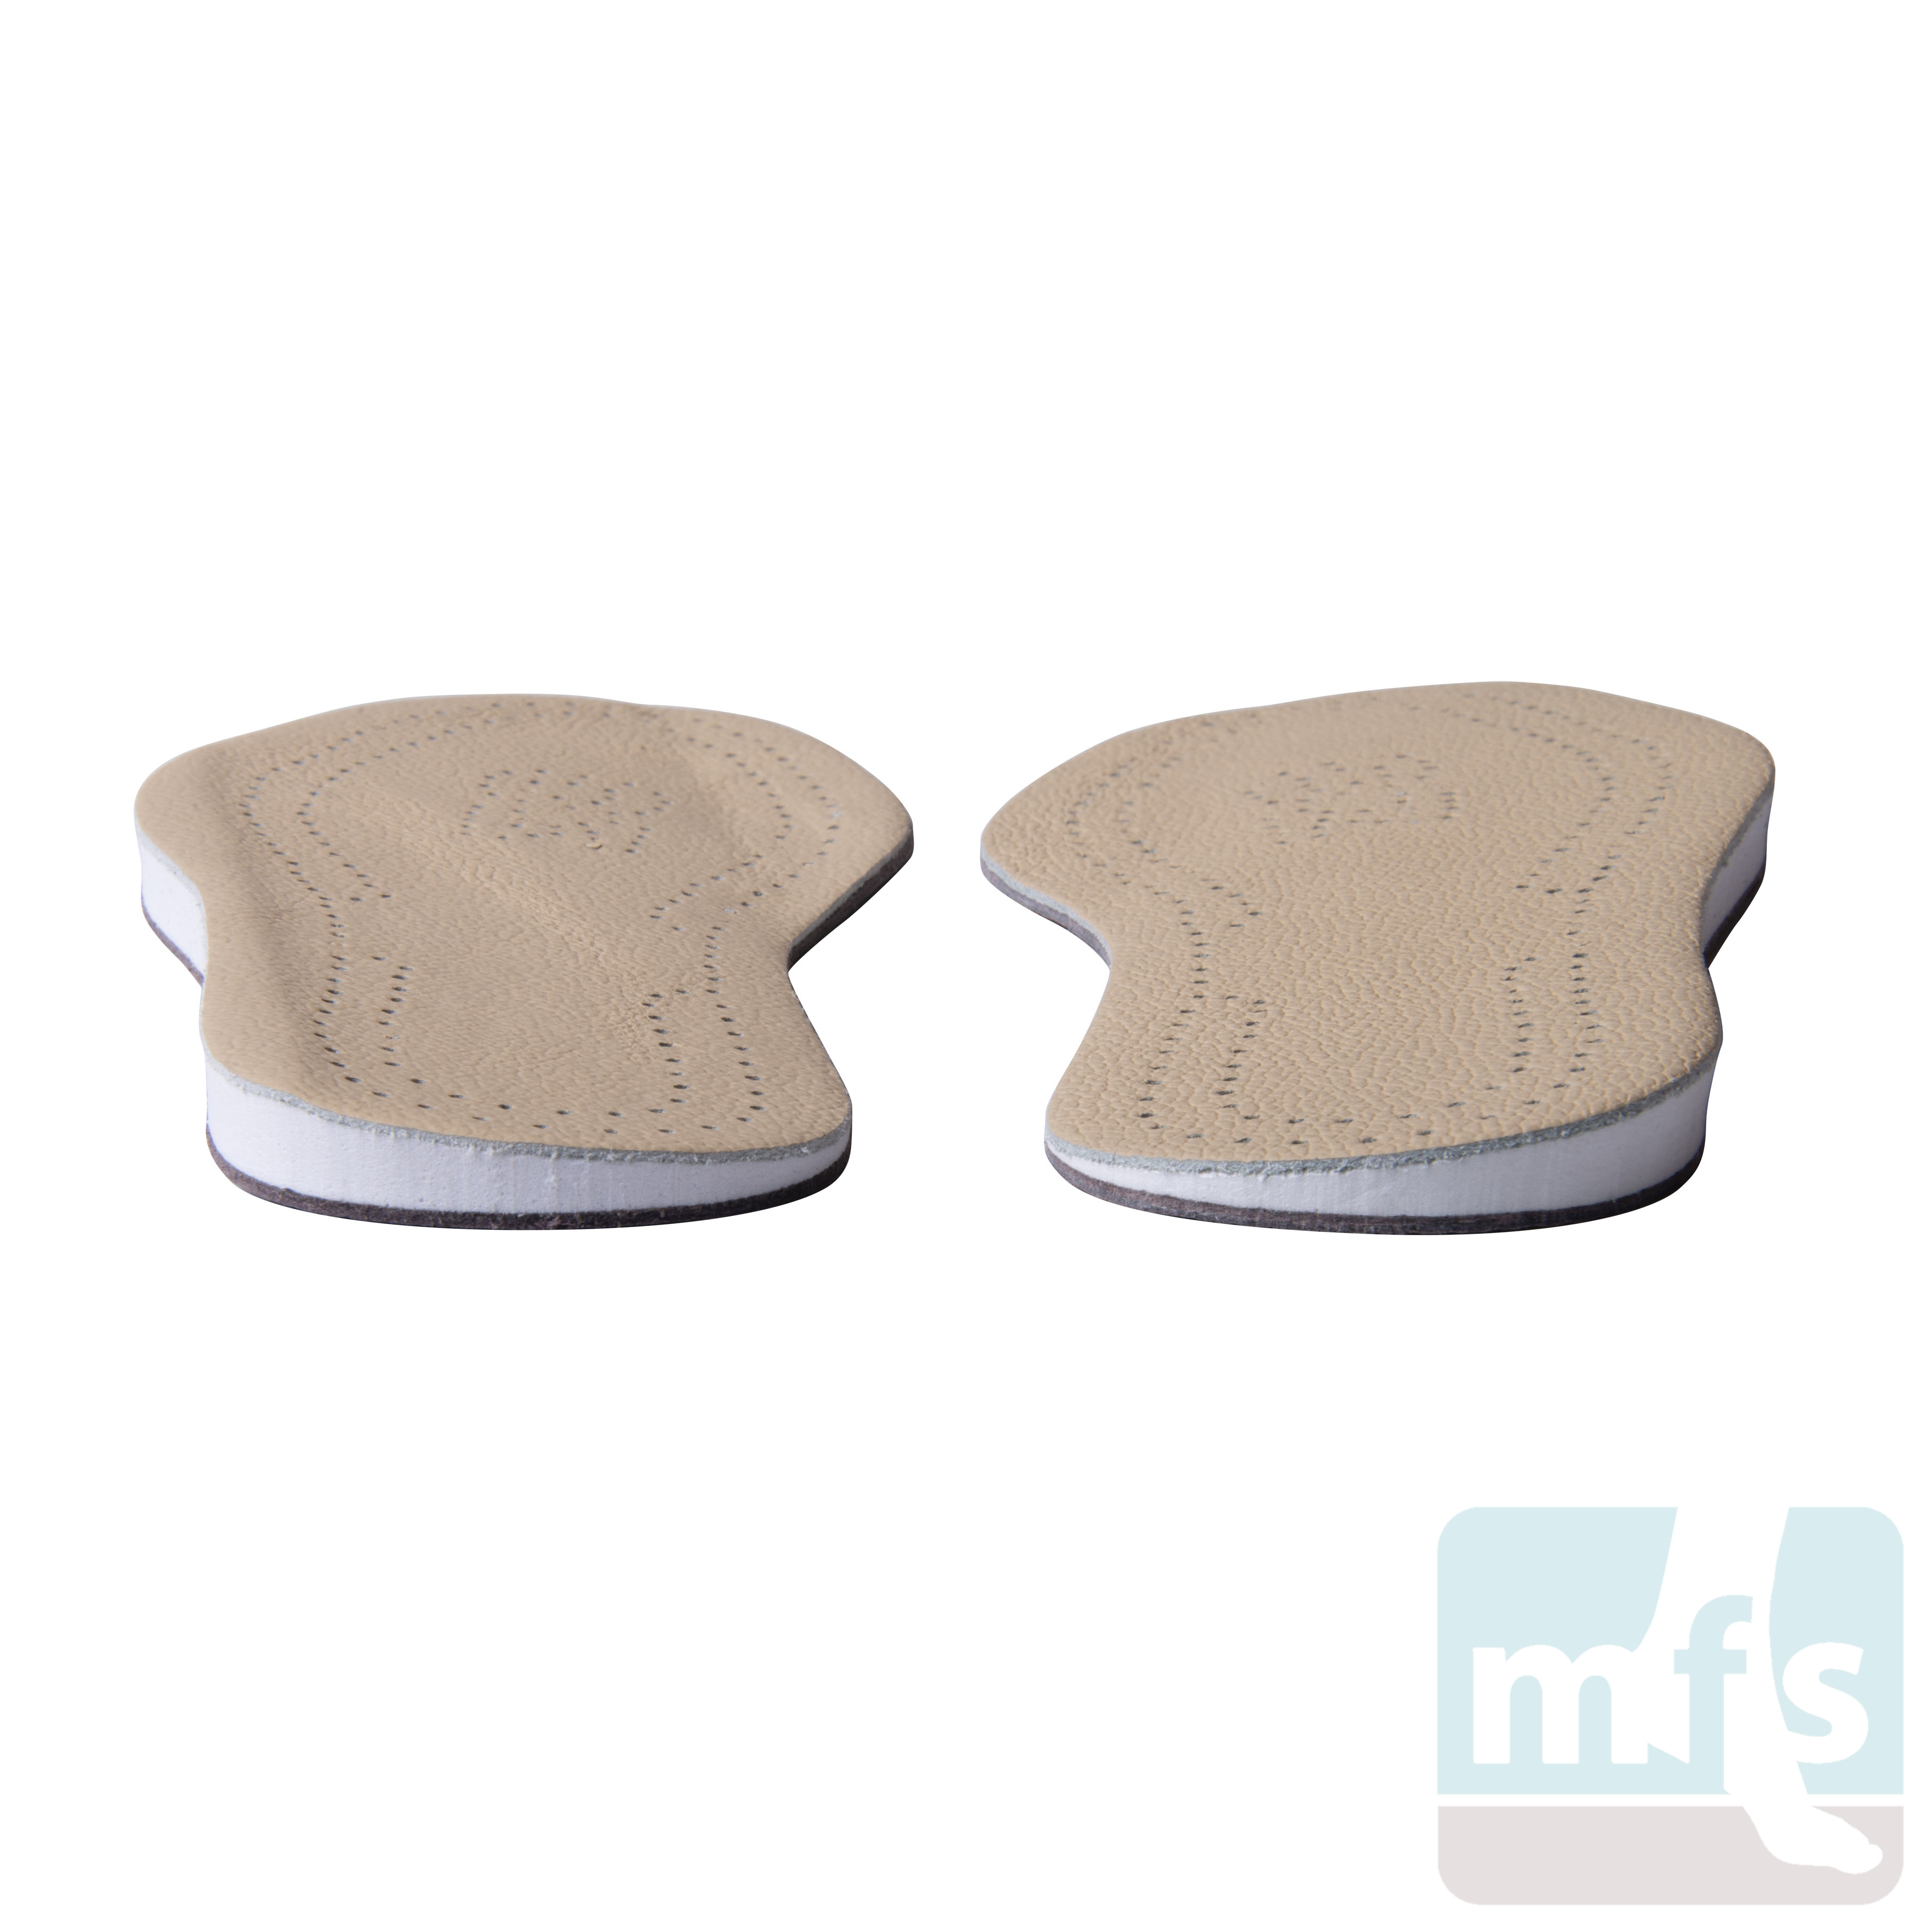 Lateral Wedges - North Coast Medical